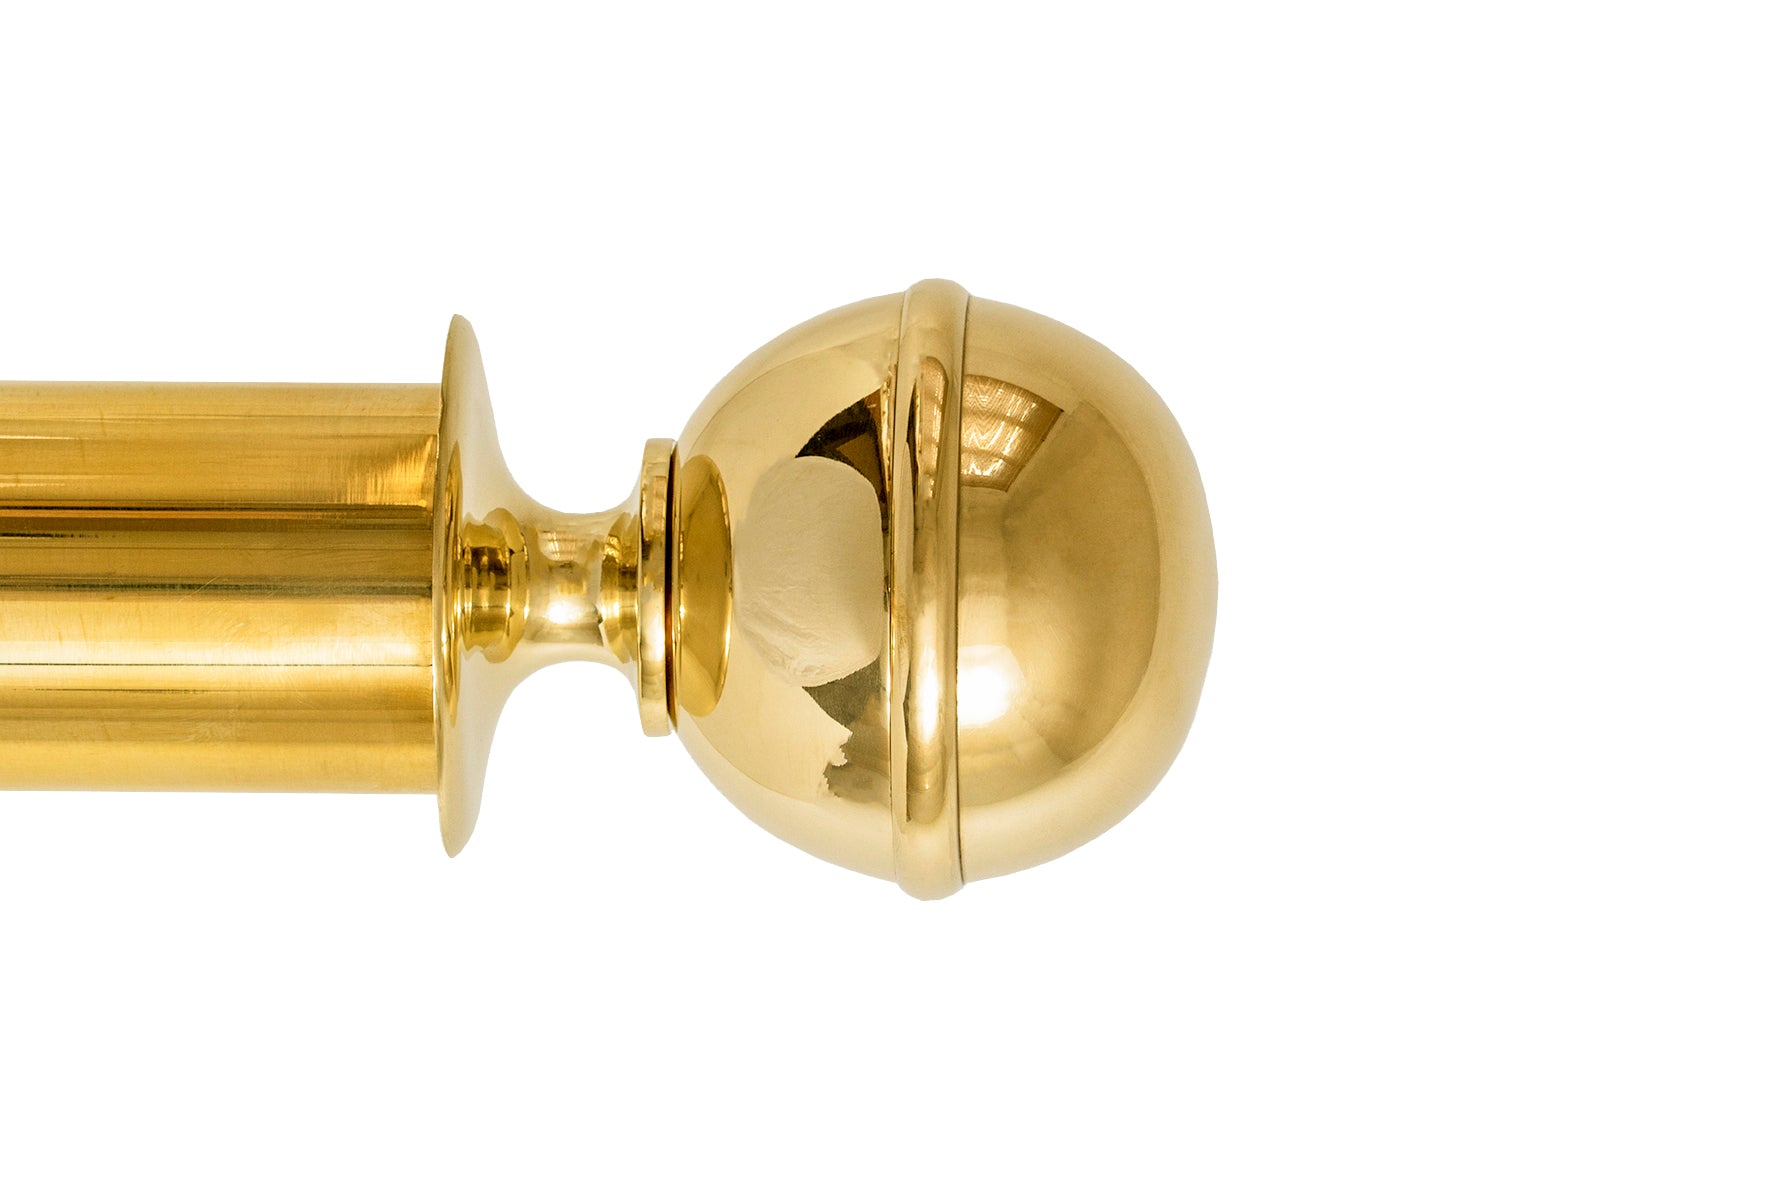 Tillys Classic One Rib Ball Finial Curtain Pole Set in Polished Brass